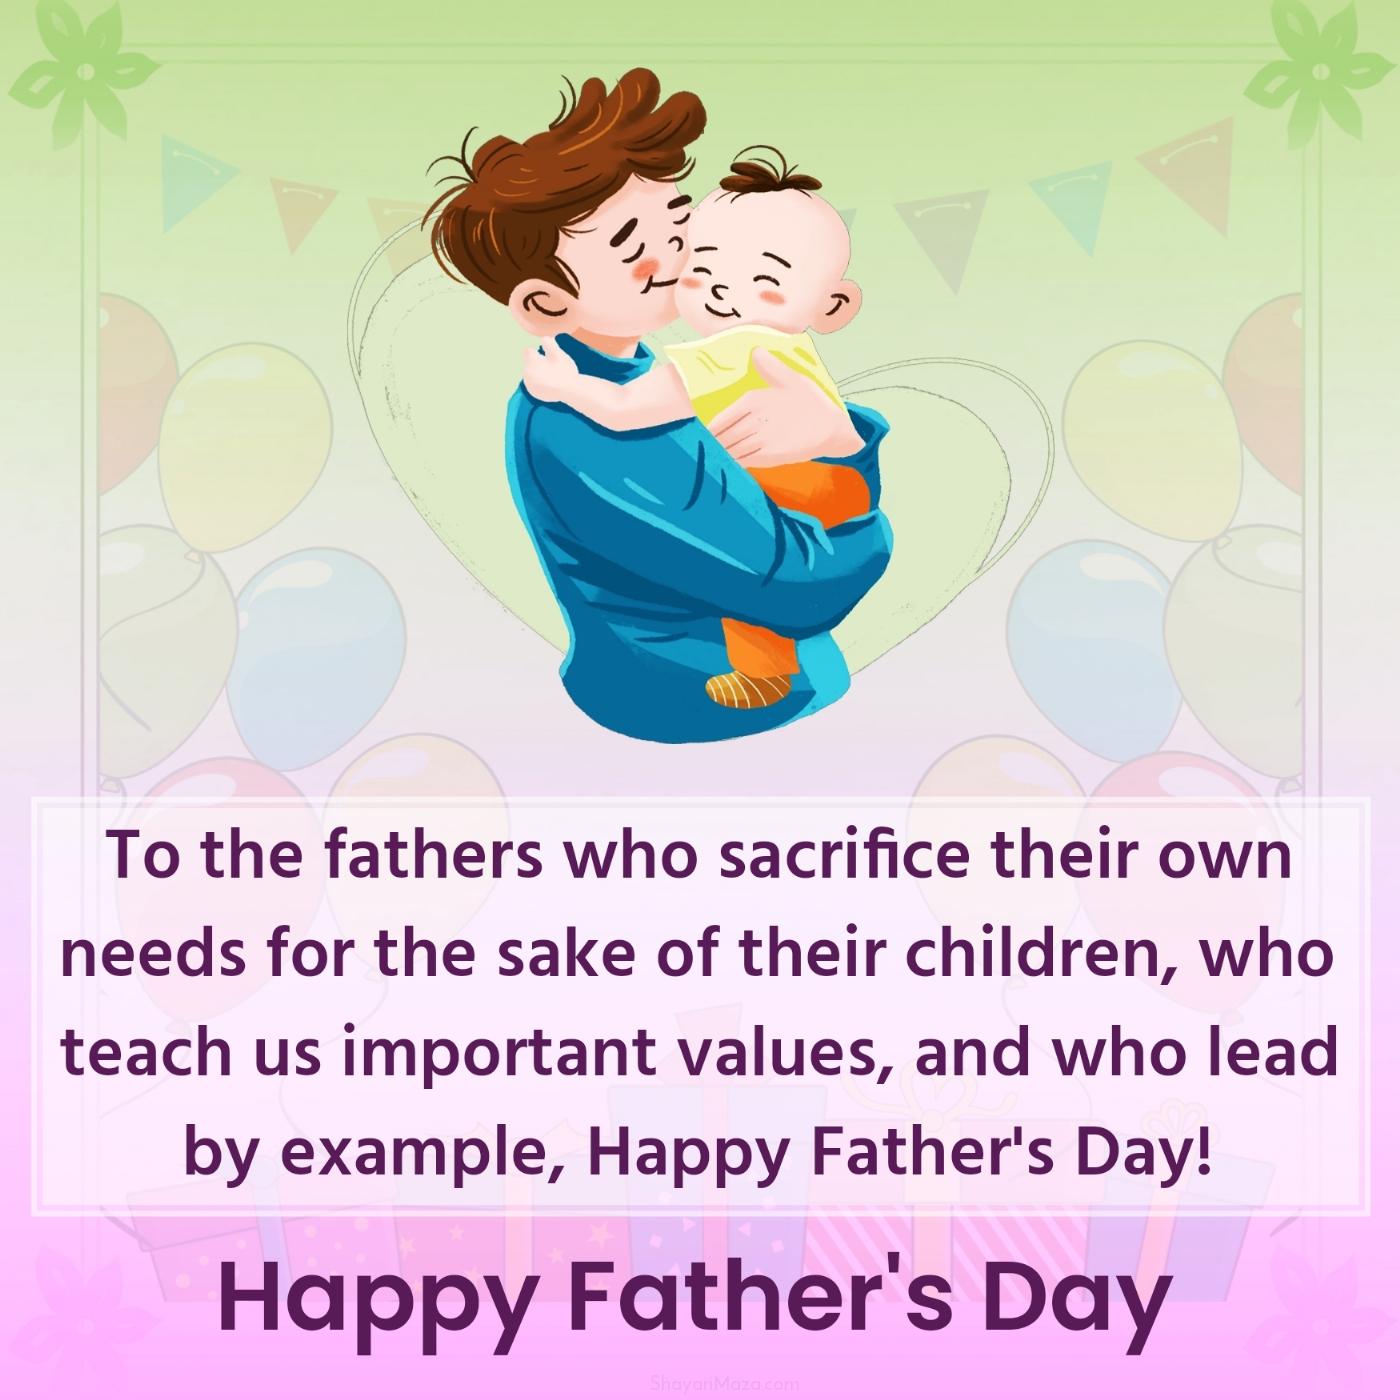 To the fathers who sacrifice their own needs for the sake of their children